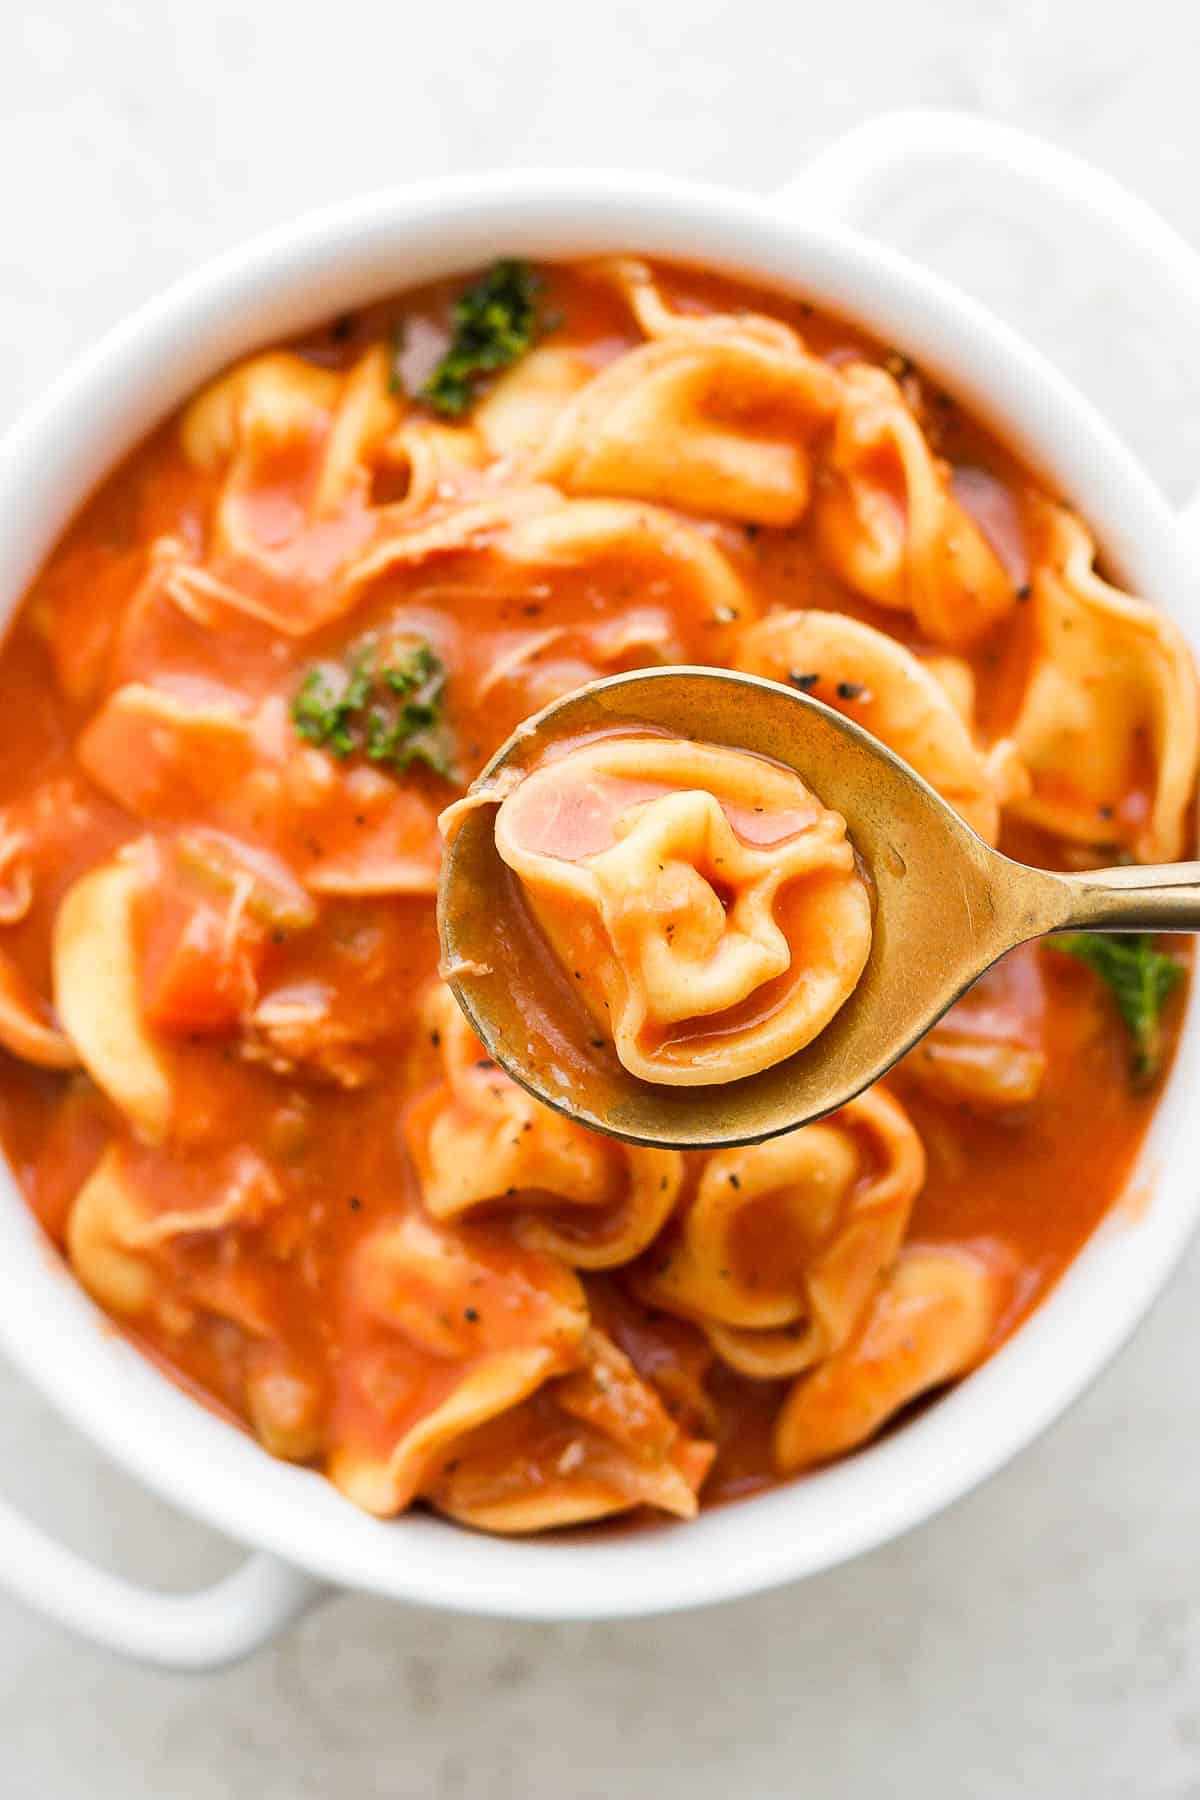 A spoon holding a piece of tortellini above the bowl for chicken tortellini soup.